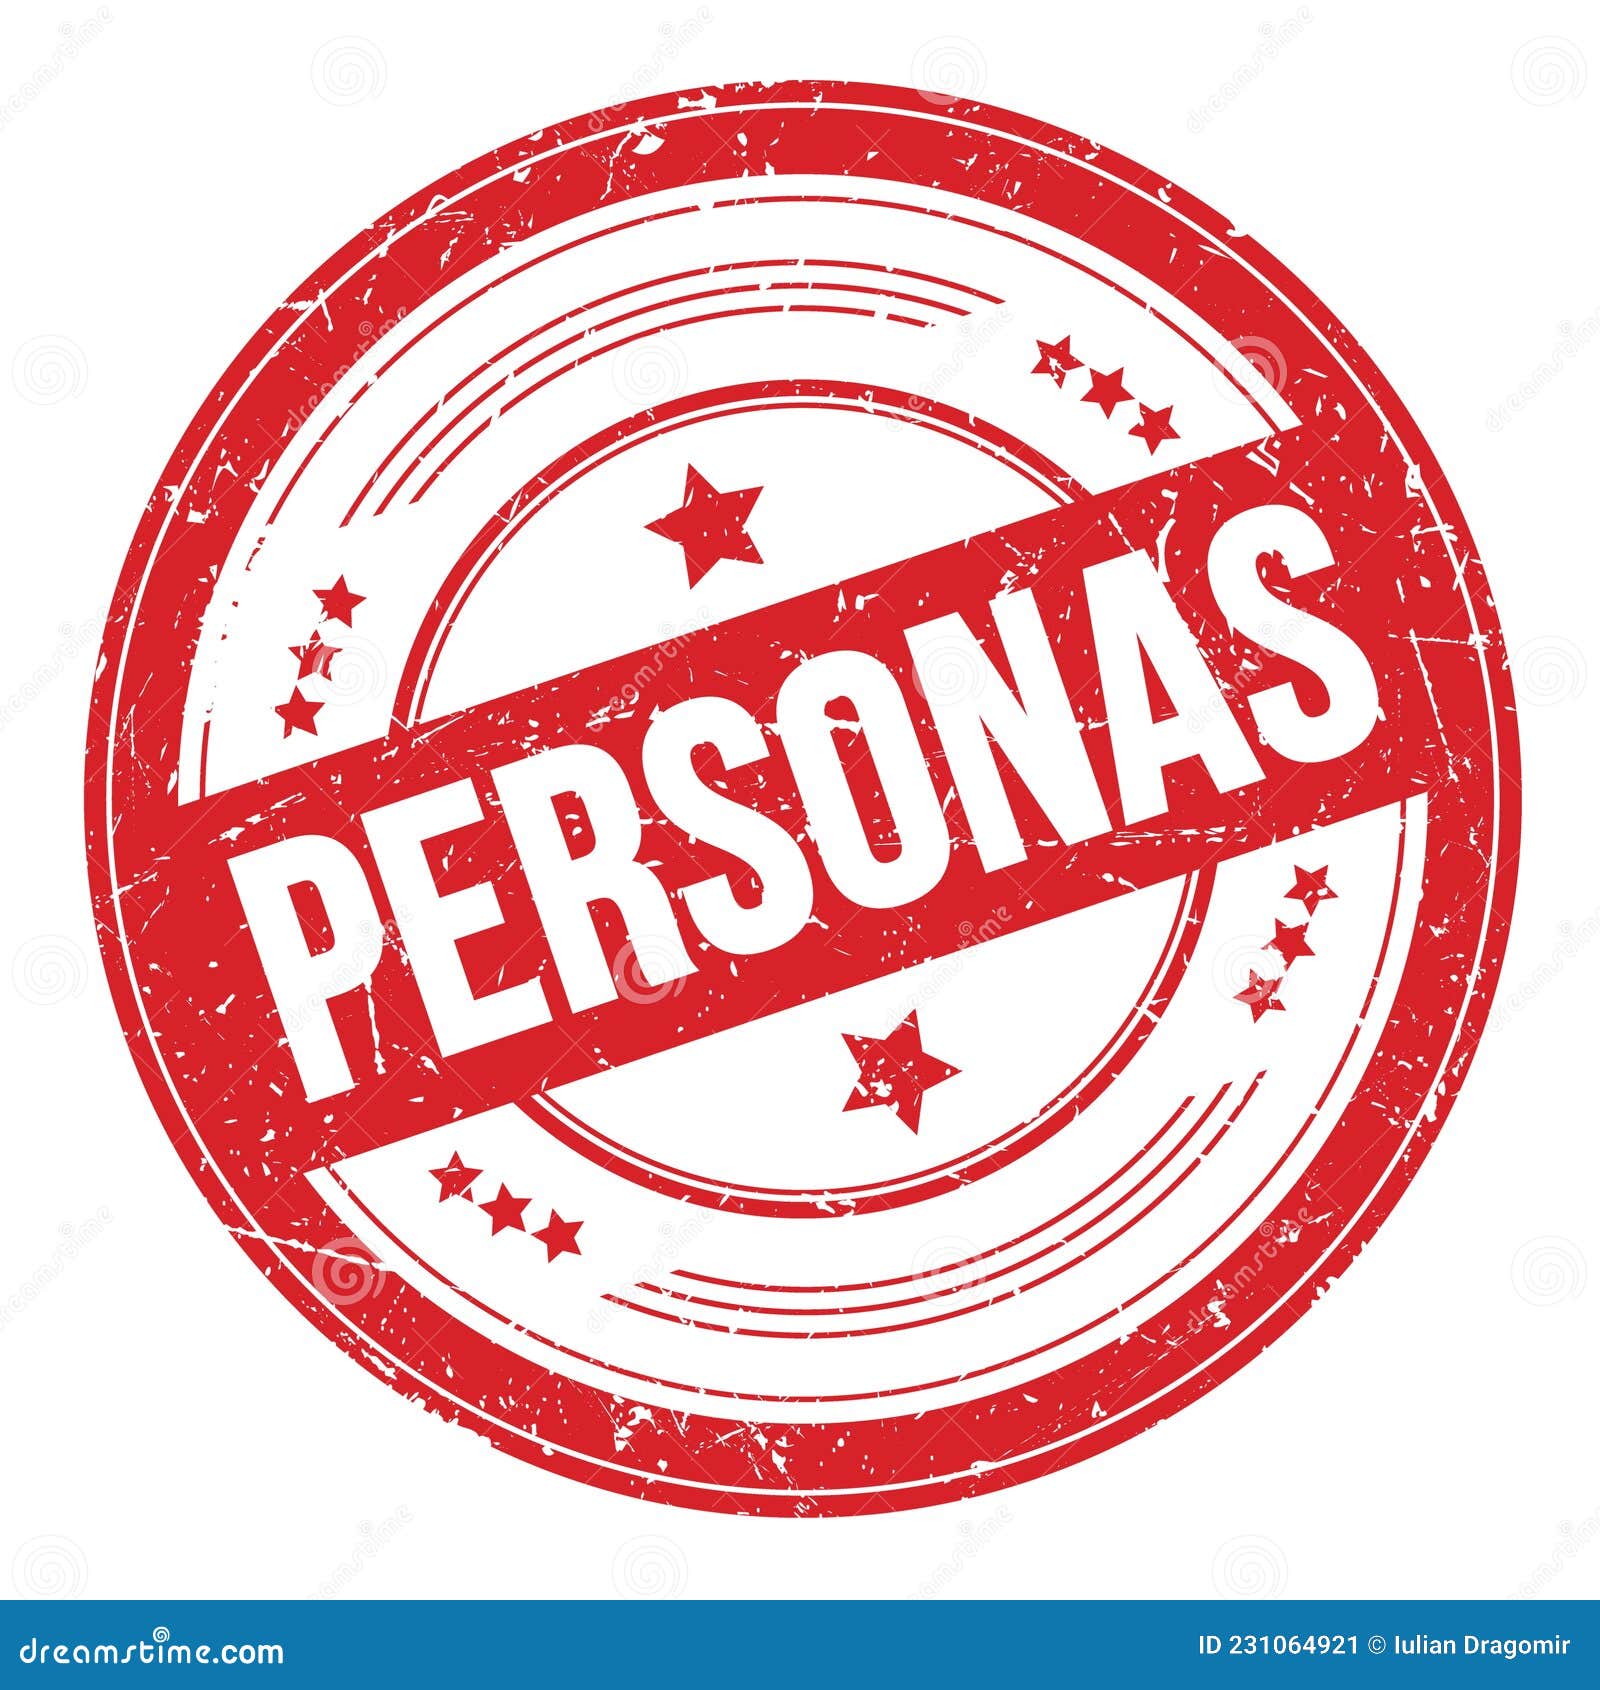 personas text on red round grungy stamp